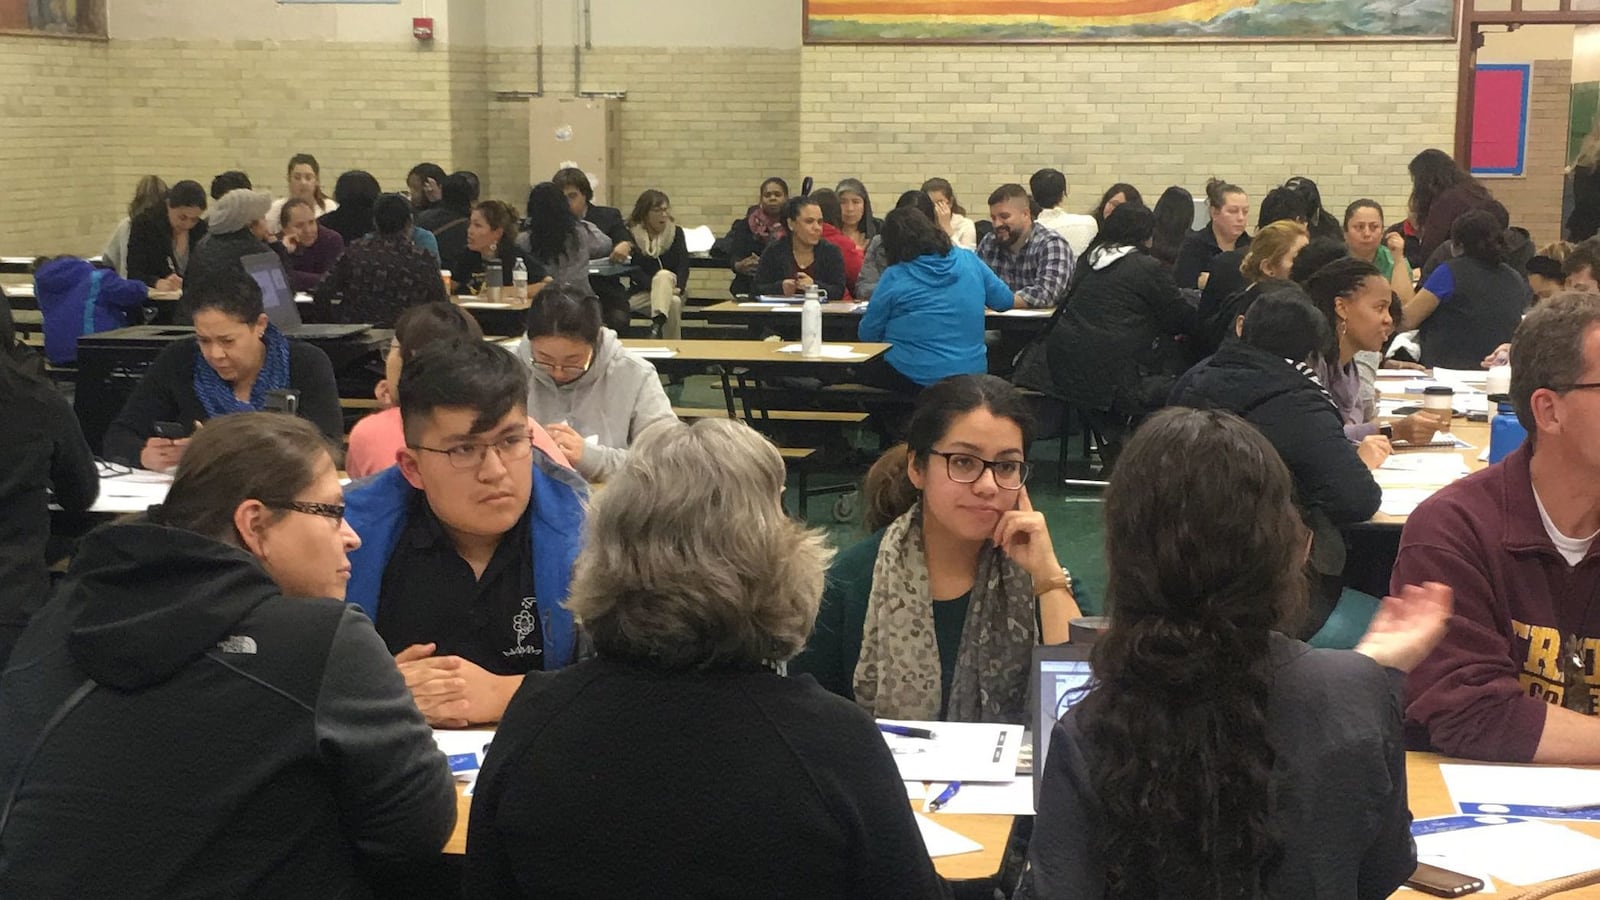 Nearly 100 residents, educators and school district leaders convened Nov. 19, 2018, at Thomas Kelly High School in Chicago to discuss their school needs.